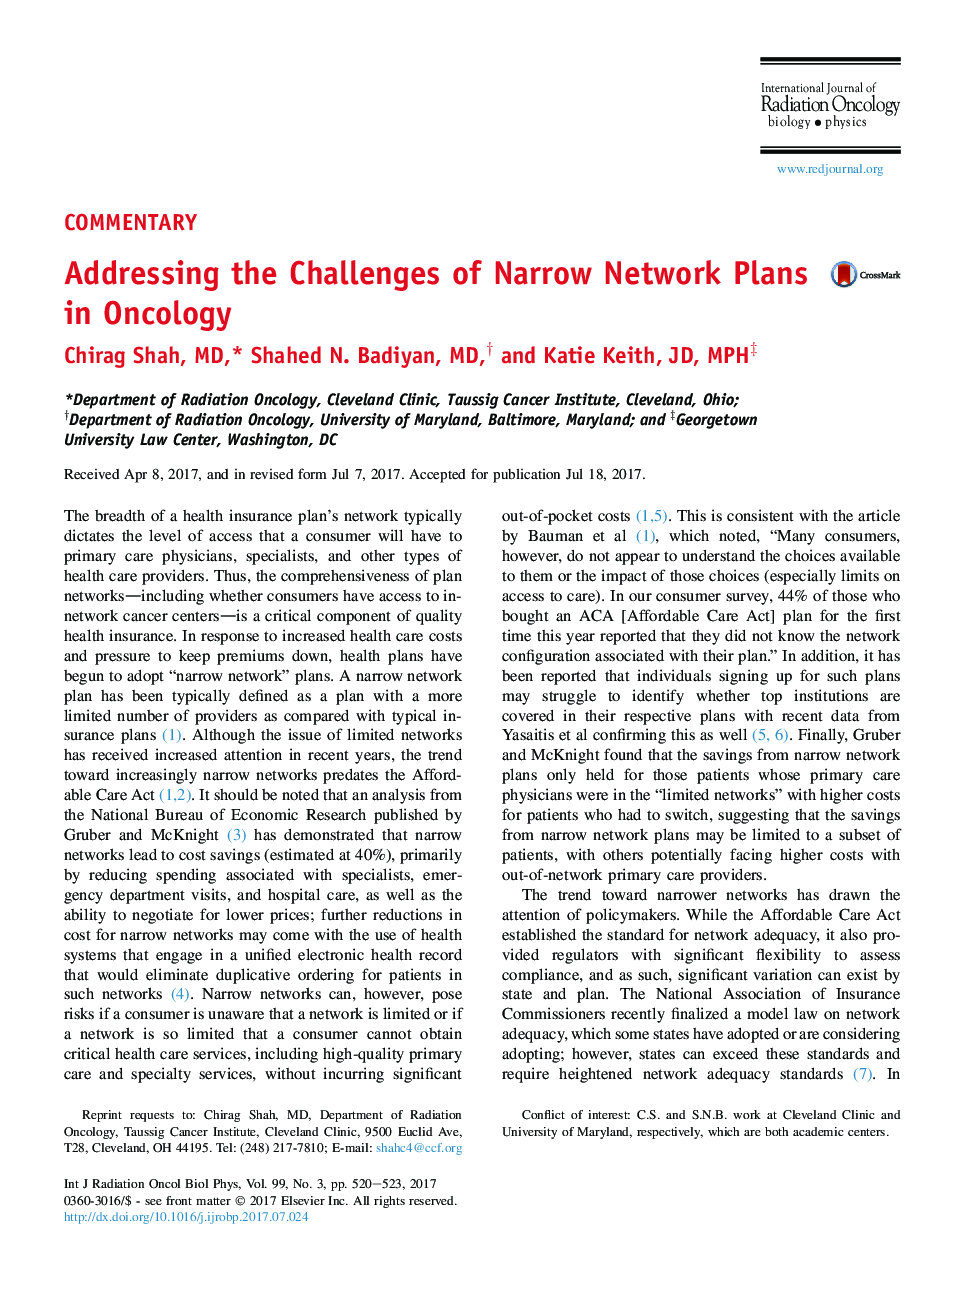 Addressing the Challenges of Narrow Network Plans in Oncology